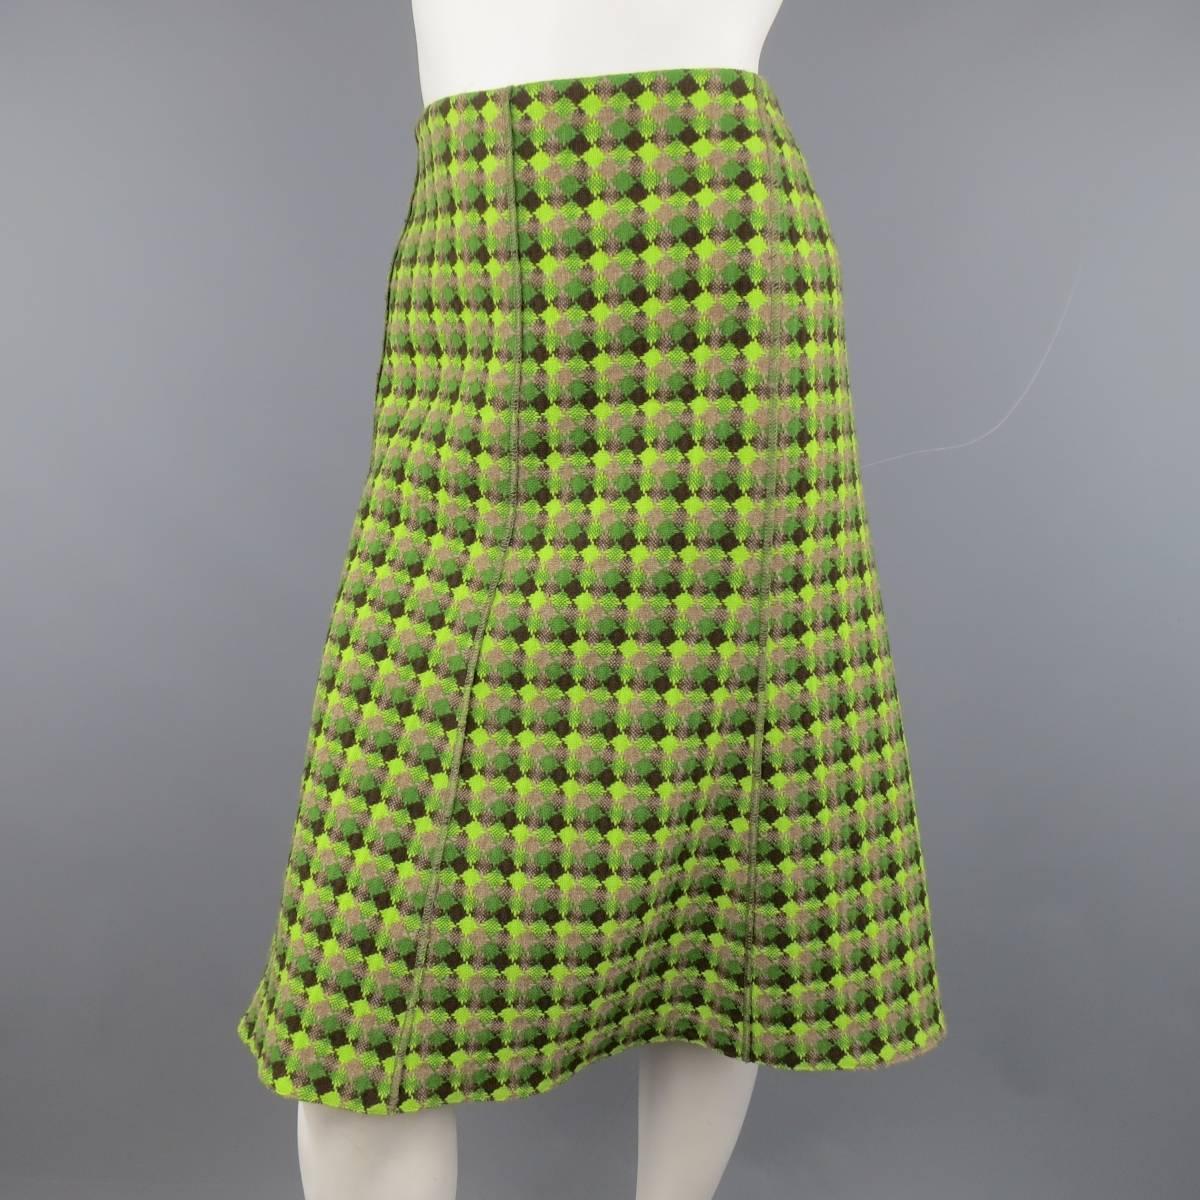 AKRIS A-line skirt flare skirt in a thick green diamond pattern tweed knit with accents of brown and taupe with exposed stitching. Fully lined. Made in Switzerland.
 
Excellent Pre-Owned Condition. Retails at $495.00.
Marked: 8 USA
 
Measurements:
